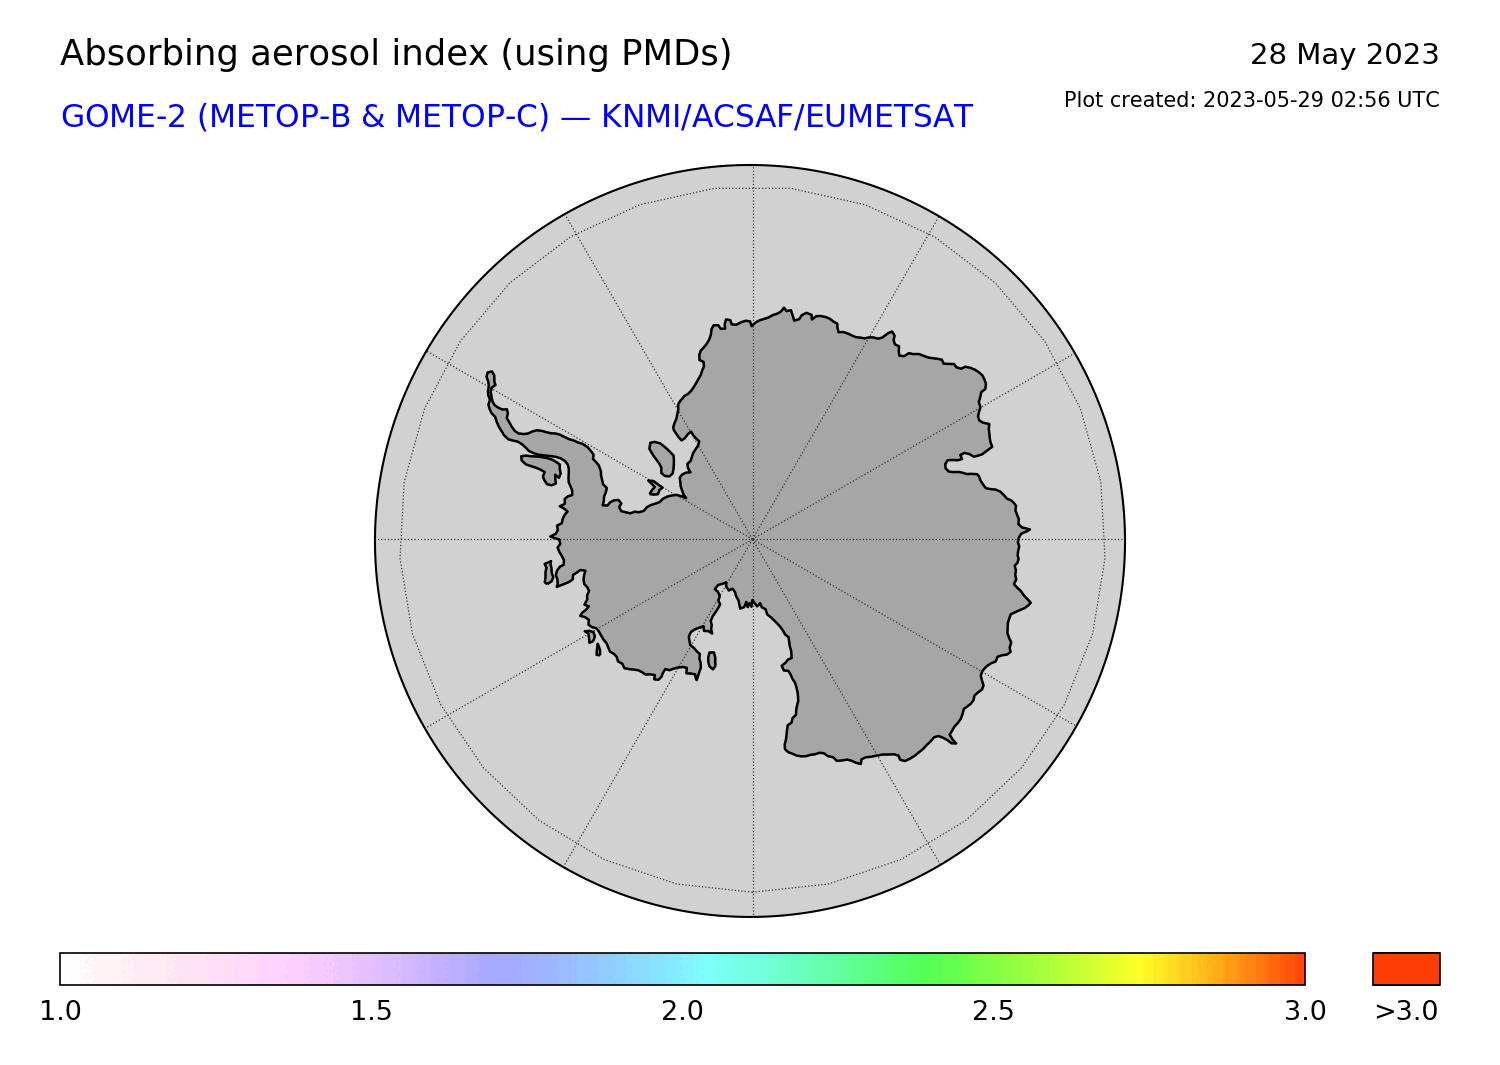 GOME-2 - Absorbing aerosol index of 28 May 2023